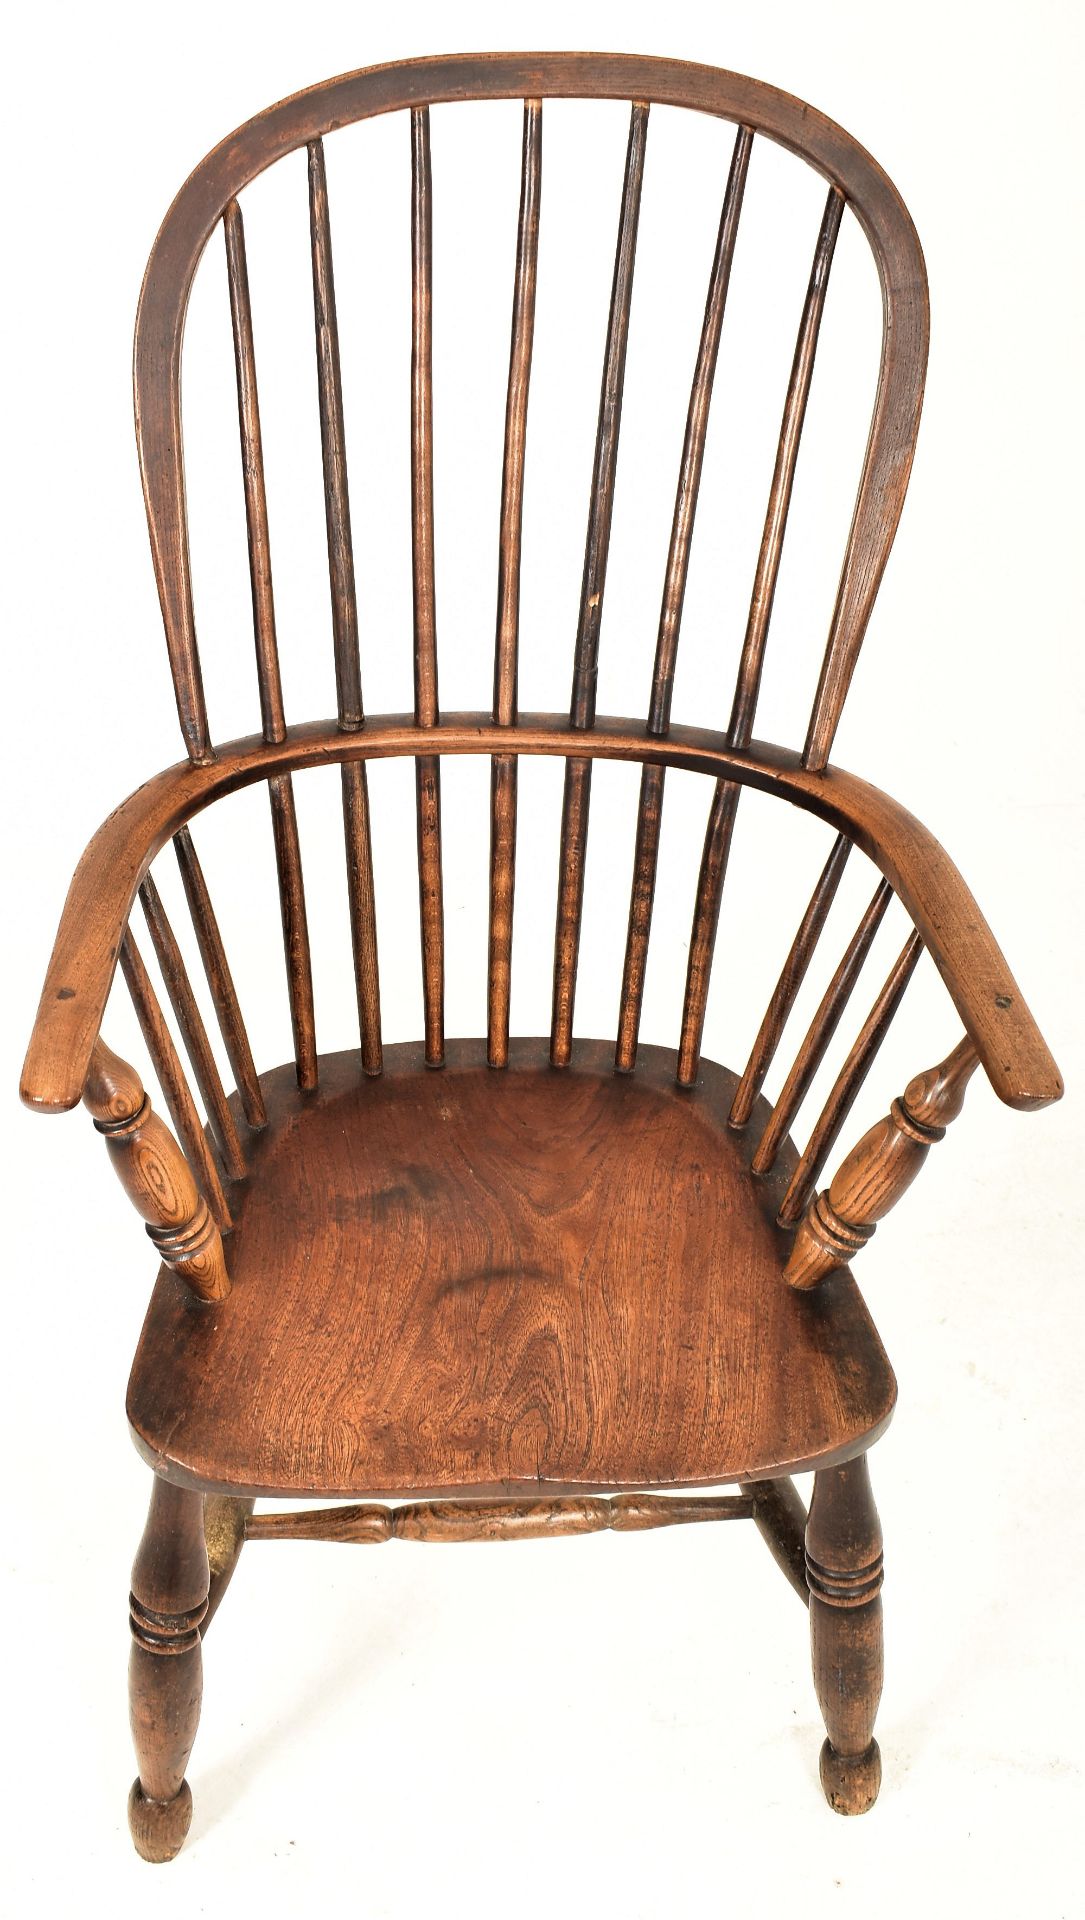 VICTORIAN 19TH CENTURY ELM COMB-BACK WINDSOR CHAIR - Image 2 of 5